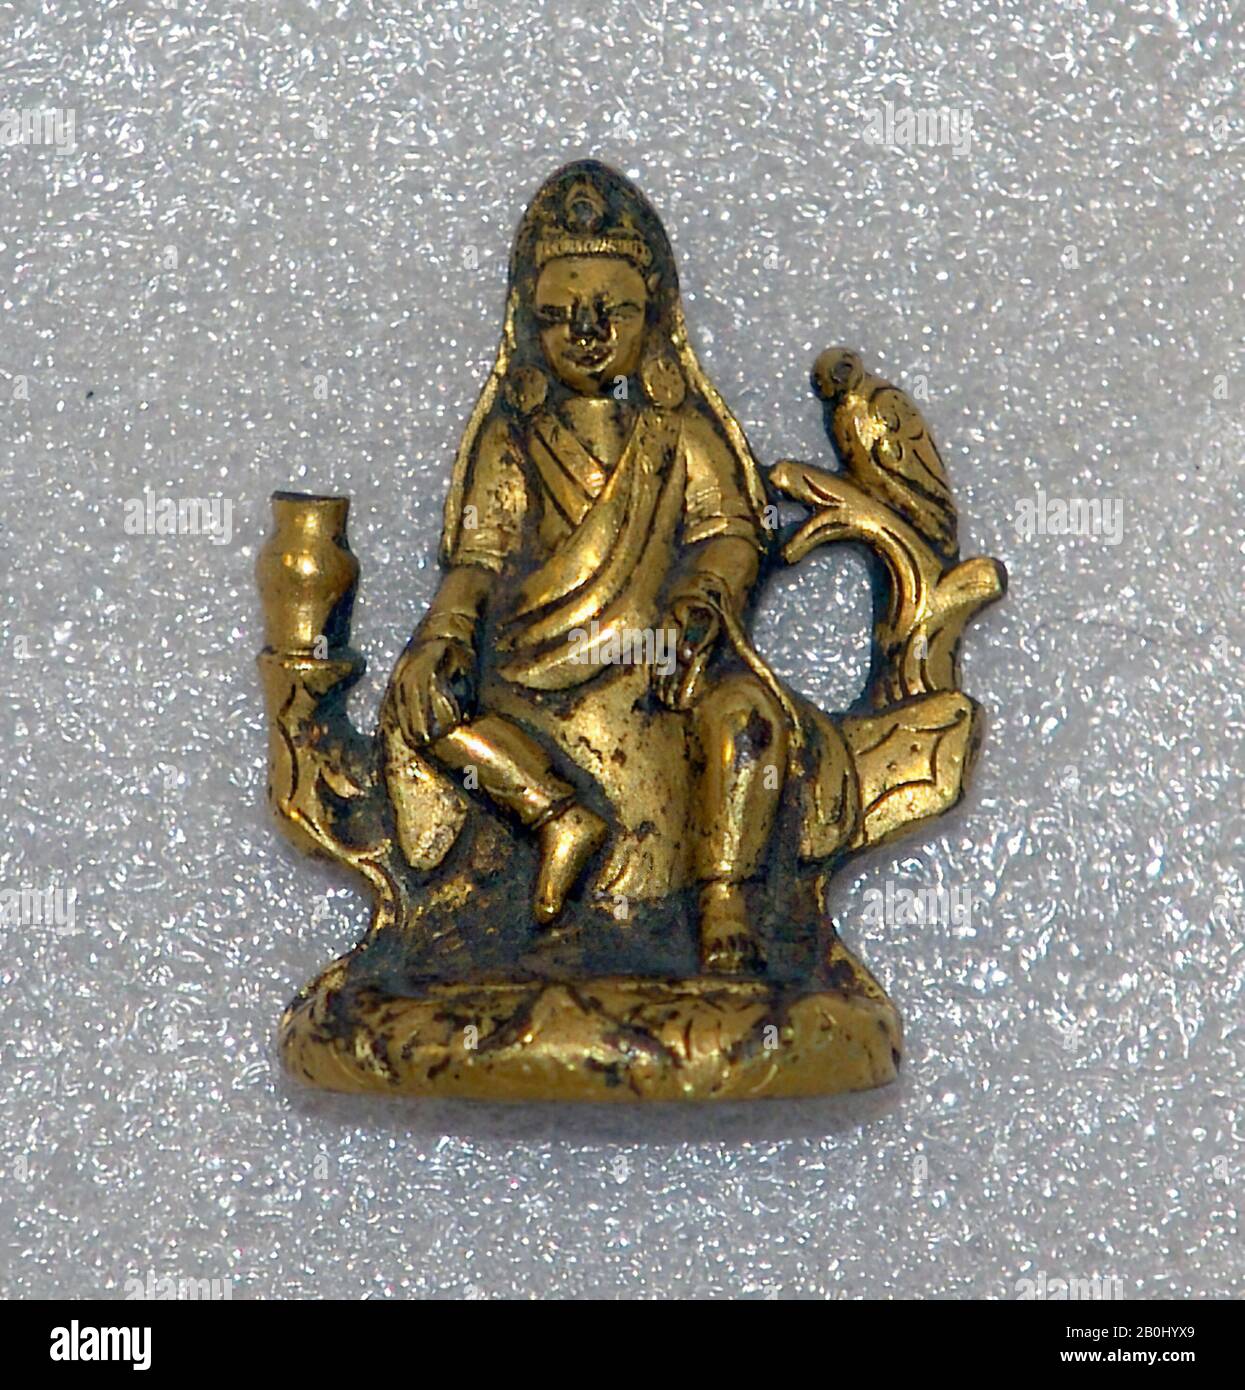 Statuette of Guanyin, China, 18th century, China, Gilt bronze, H. 1 15/16 in. (4.9 cm), Sculpture Stock Photo